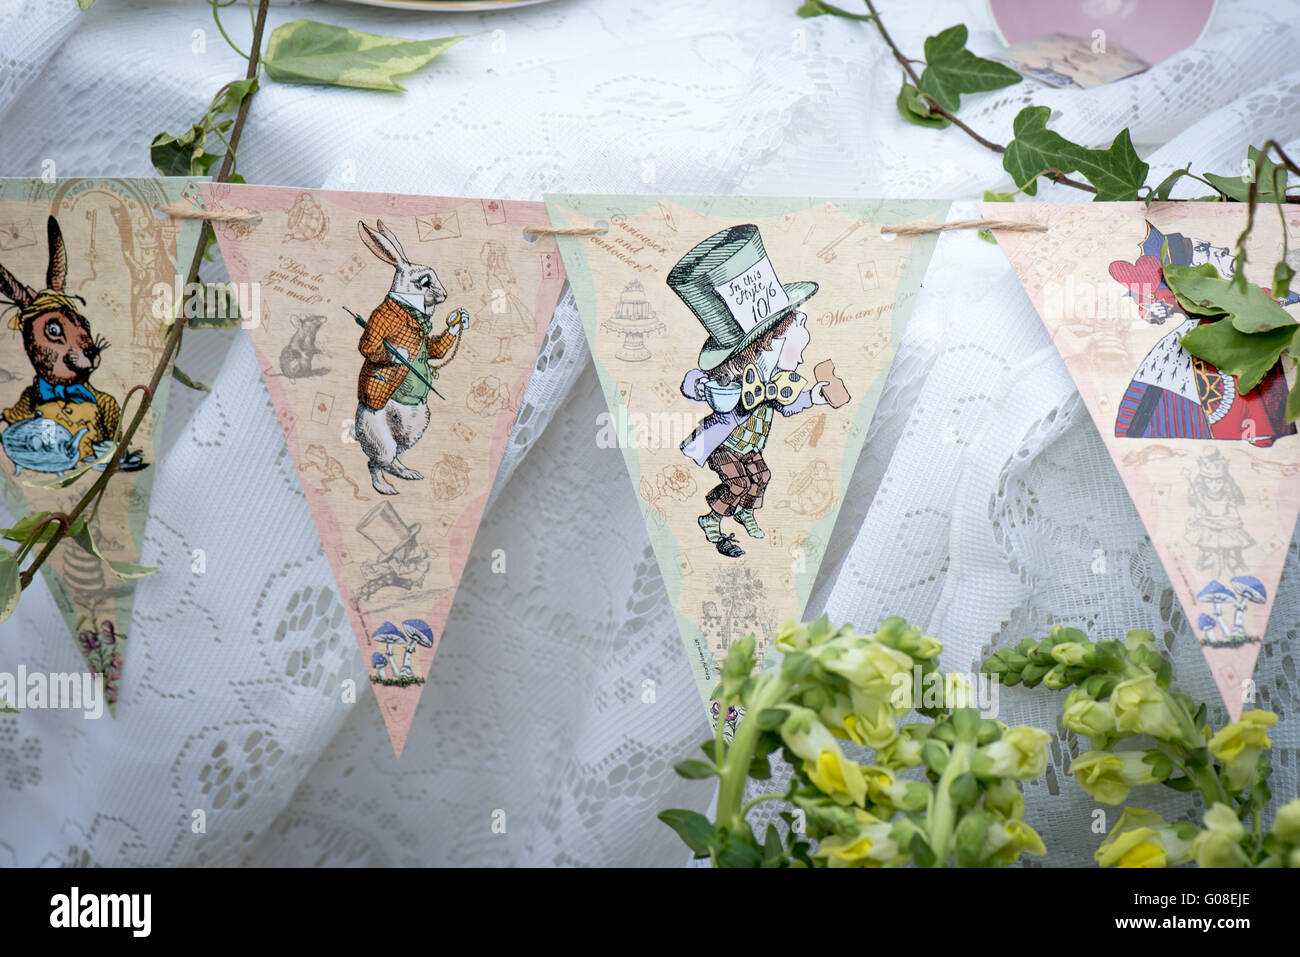 Mad Hatter afternoon tea party decorations at Cake International – The  Sugarcraft, Cake Decorating and Baking Show in London Stock Photo - Alamy